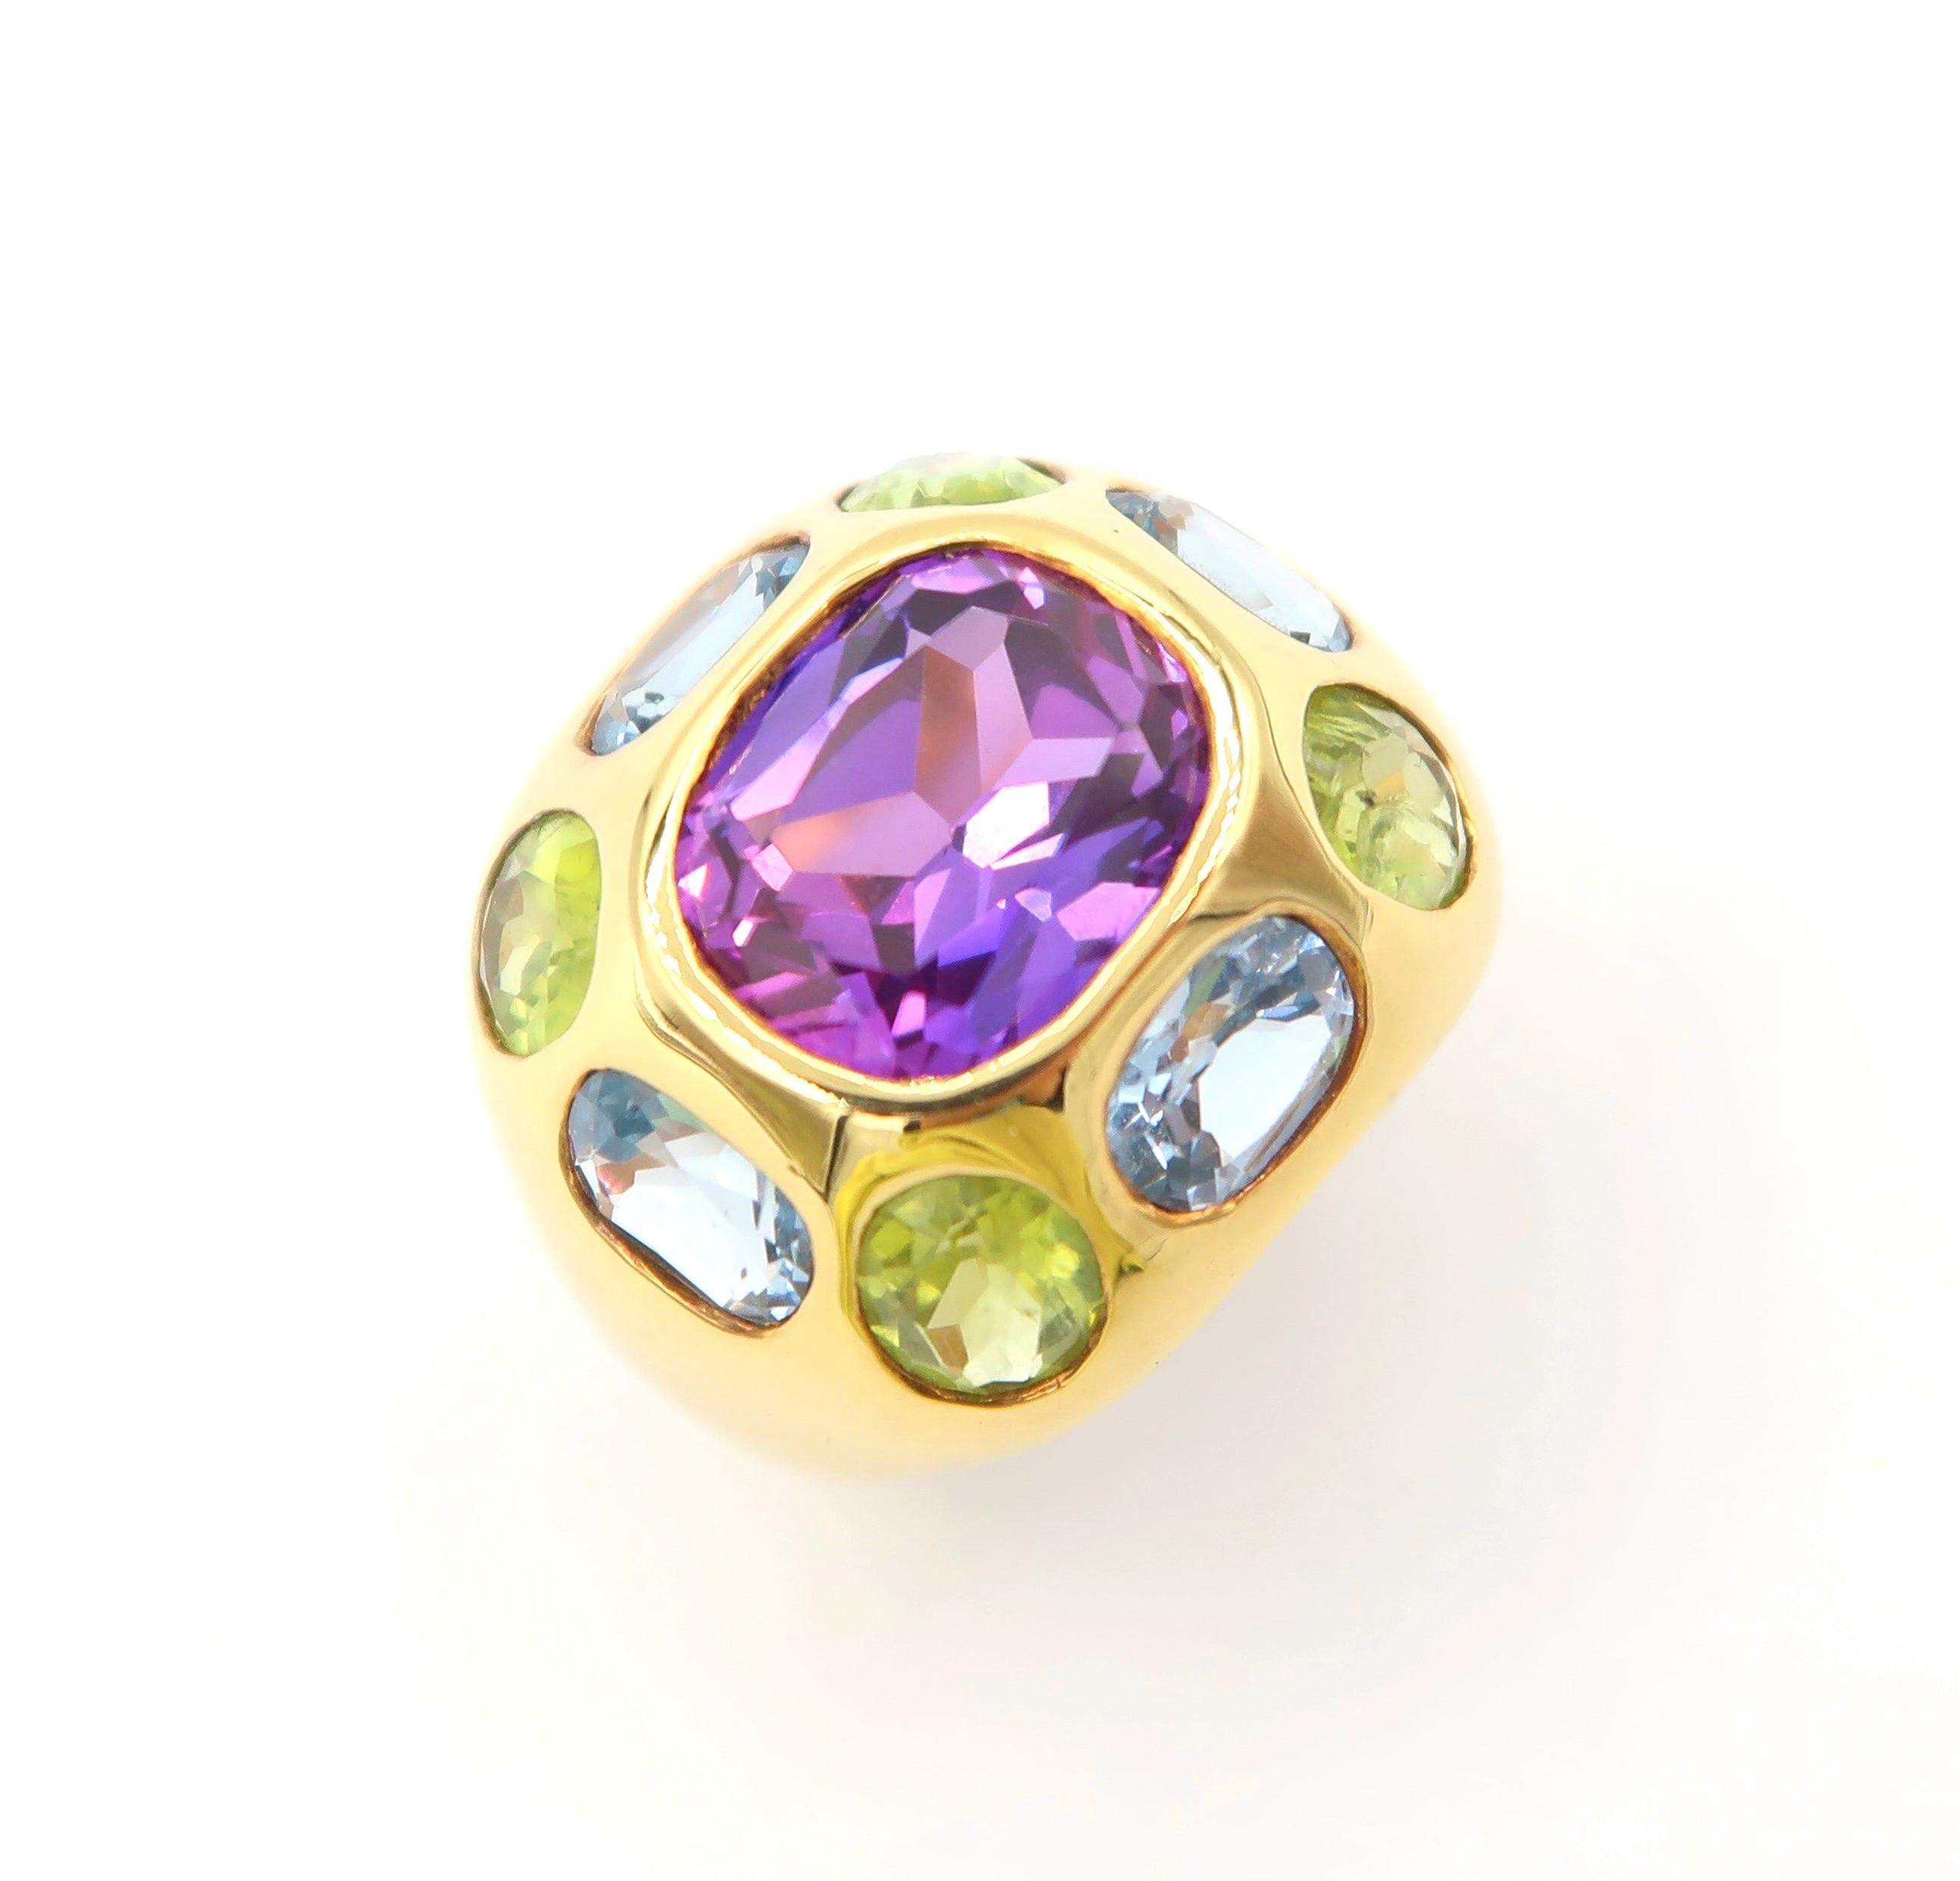 Cushion Cut Amethyst 18K Yellow Gold Cocktail Ring embellished with Peridot and Blue Topaz in the Colours of Mayfield Lavender Fields

Amethyst, Peridot, Blue Topaz: 8.71 ct
Gold: 18K Gold, 12.922 g

Ring size: 52 / US 6

Please let us know should